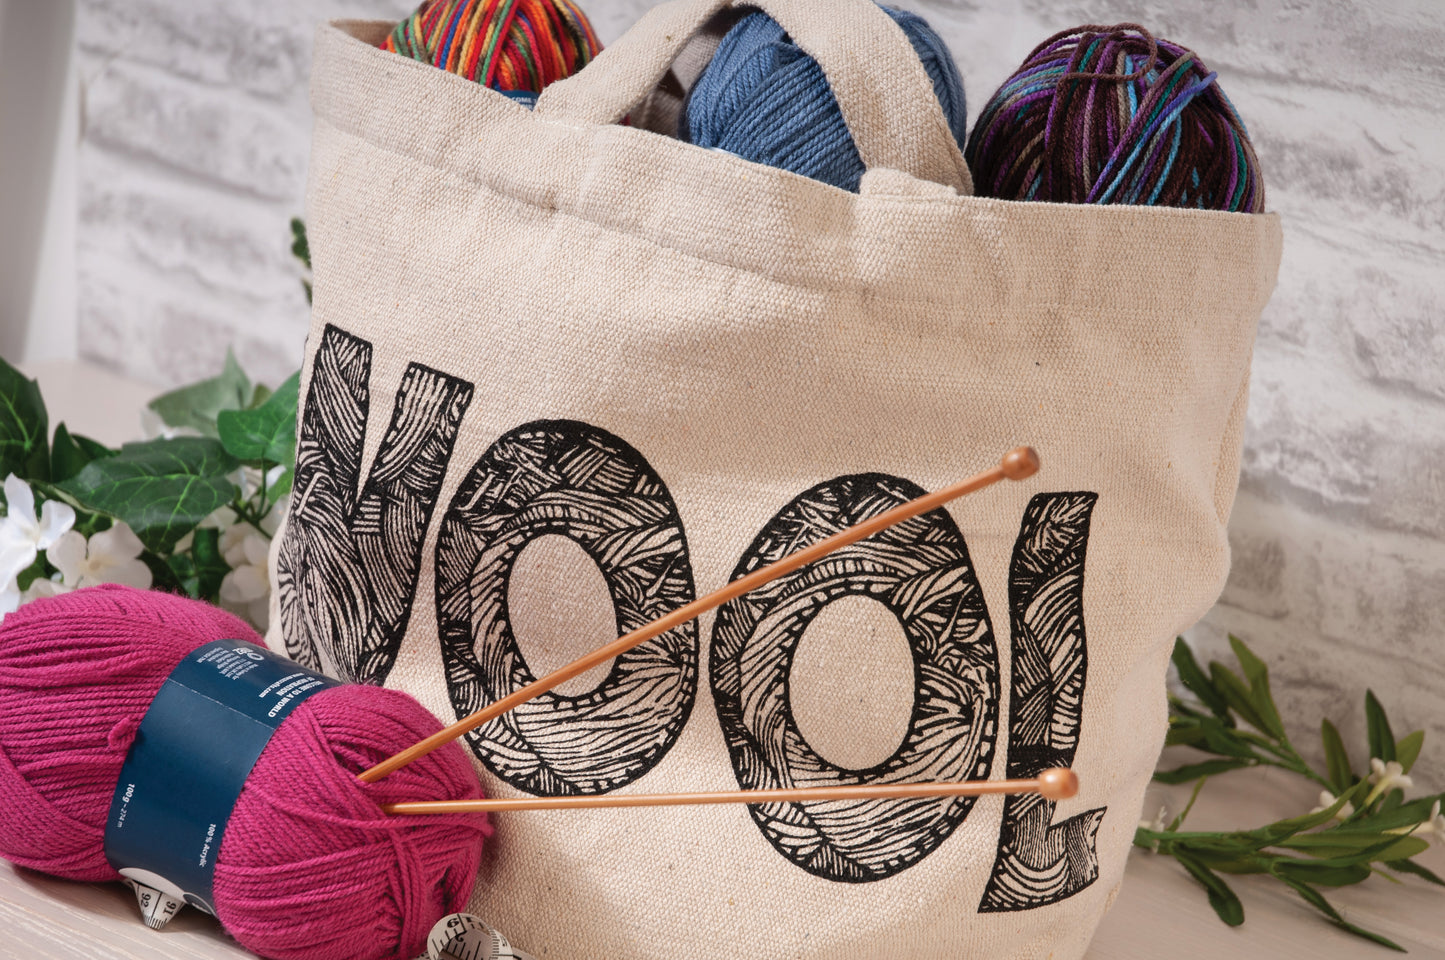 Yarn / Wool Tote Bag - Keeps your Knitting in One Tidy Place